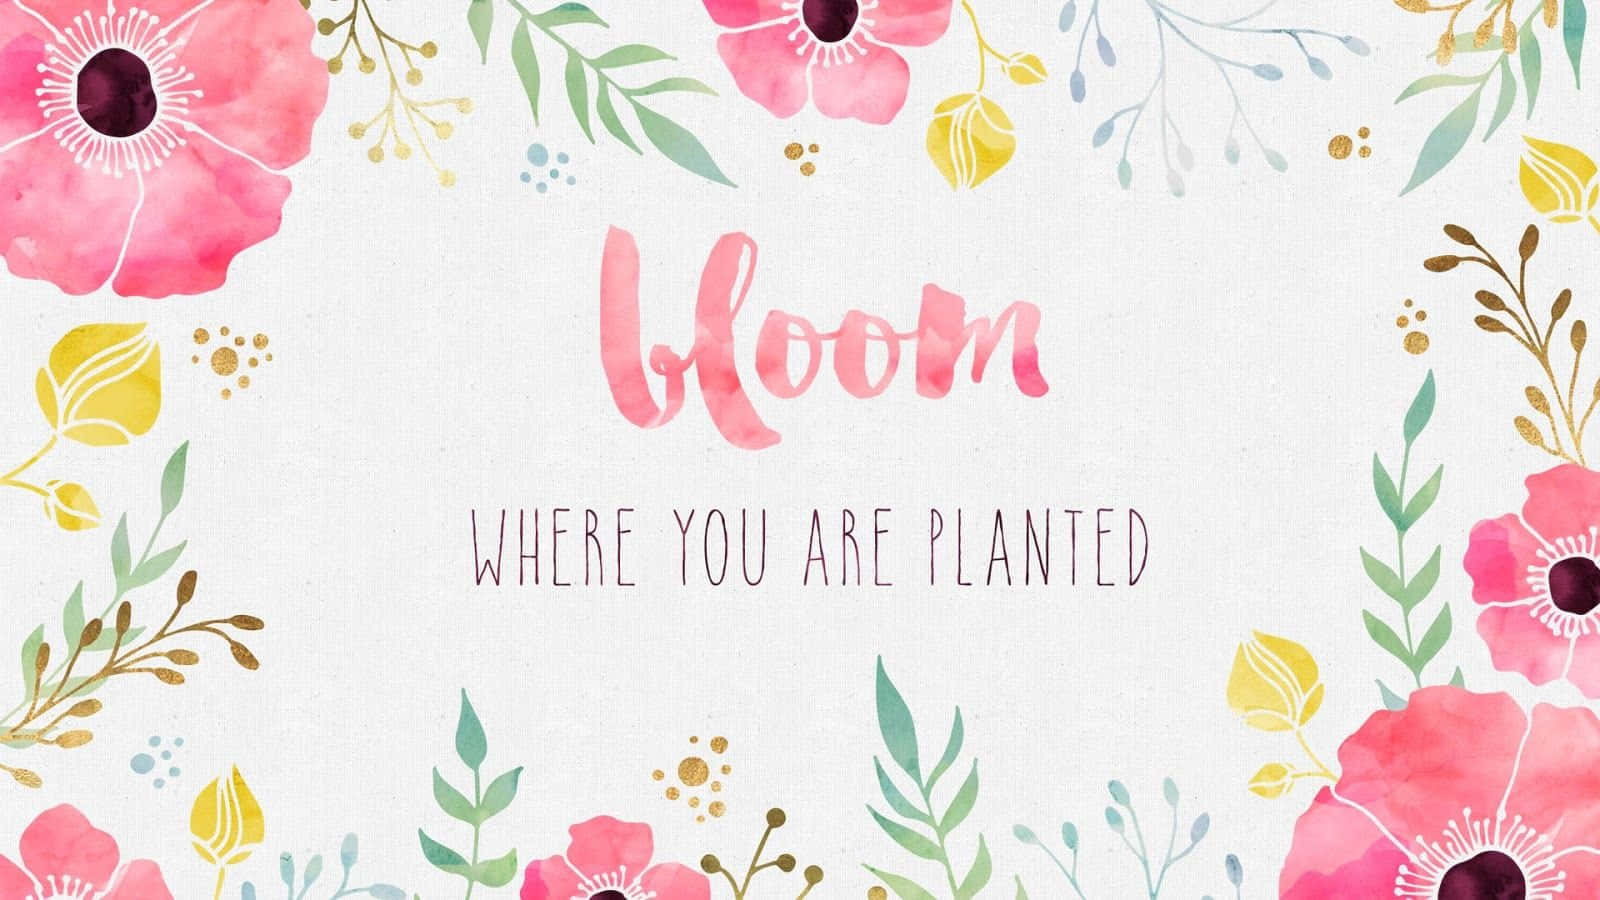 A Watercolor Floral Design With The Words Bloom Where You Are Planted Wallpaper